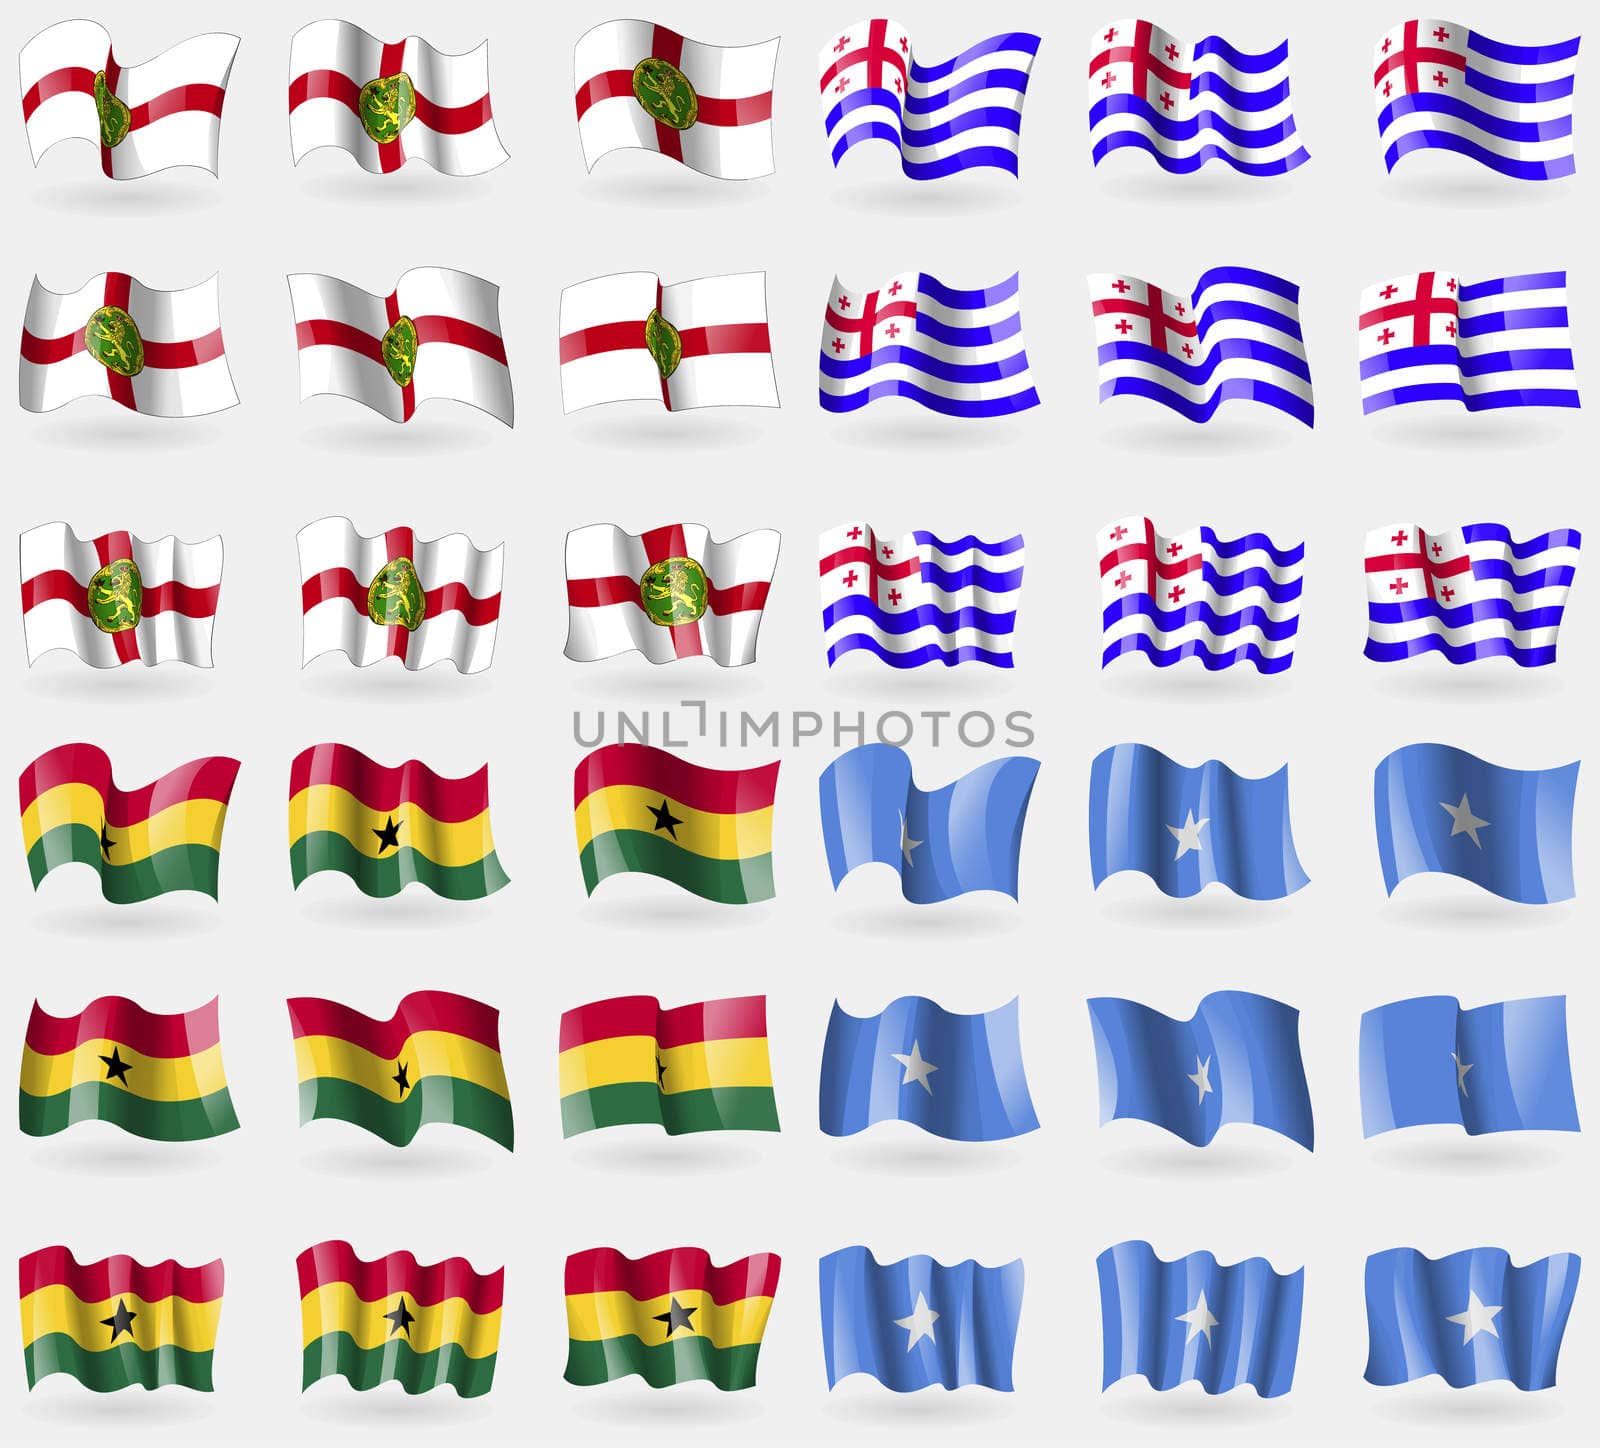 Alderney, Ajaria, Ghana, Somalia. Set of 36 flags of the countries of the world. illustration